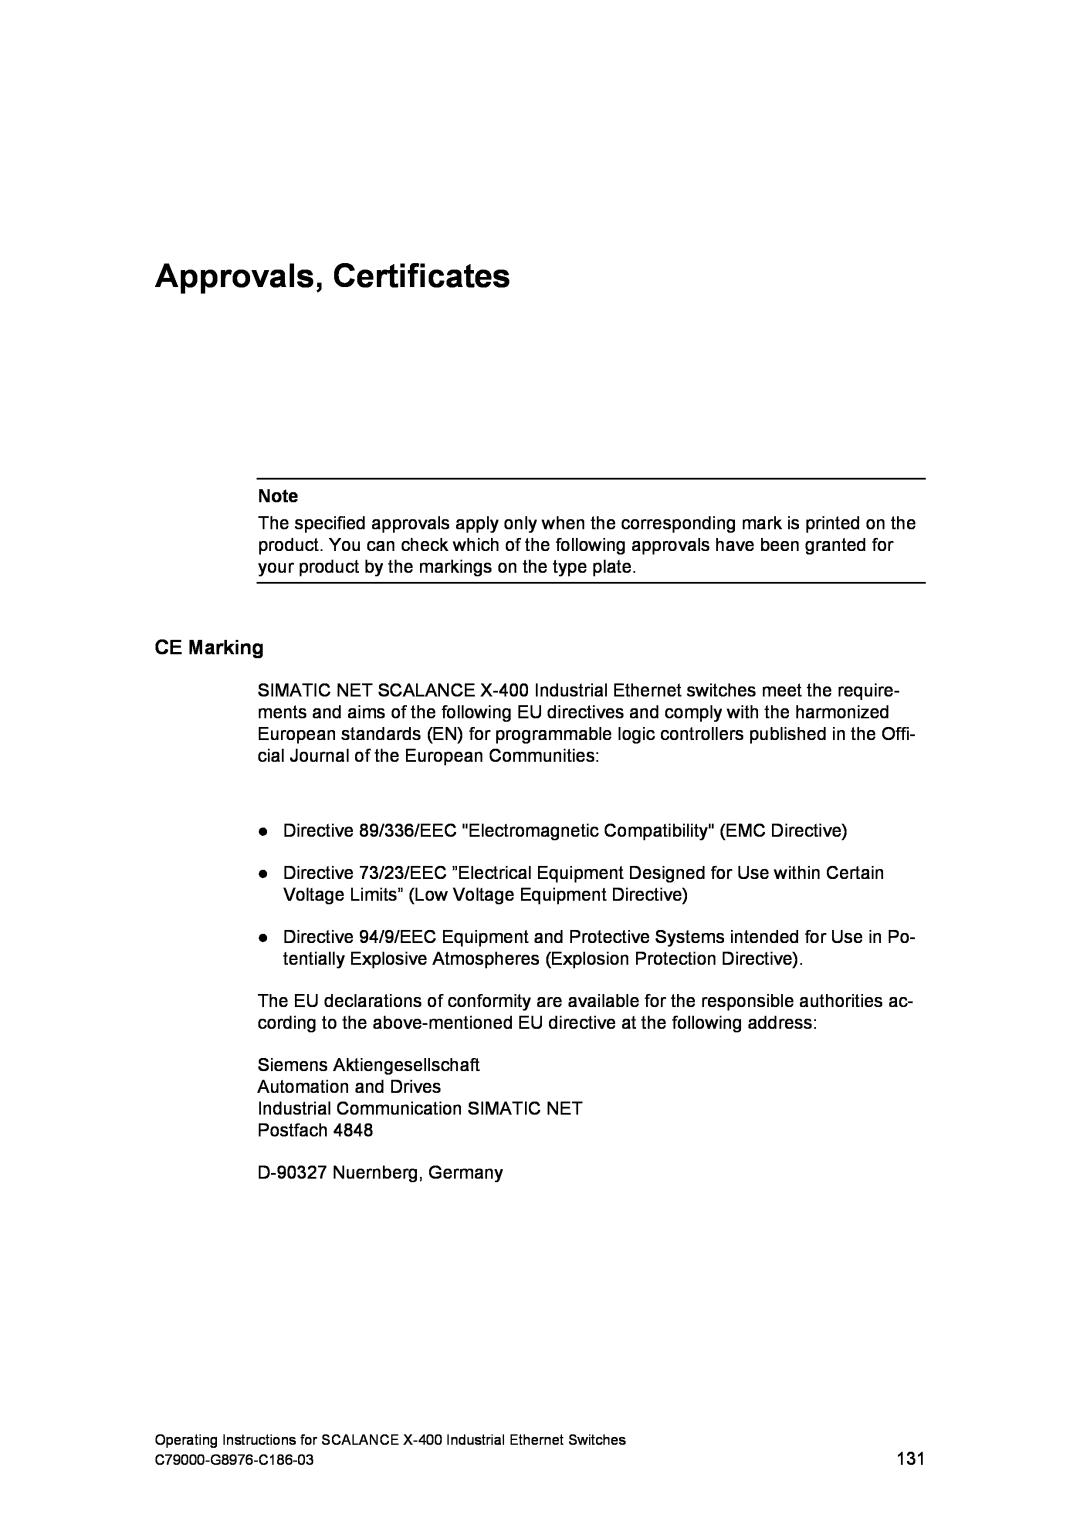 Siemens X-400 technical specifications Approvals, Certificates, CE Marking 